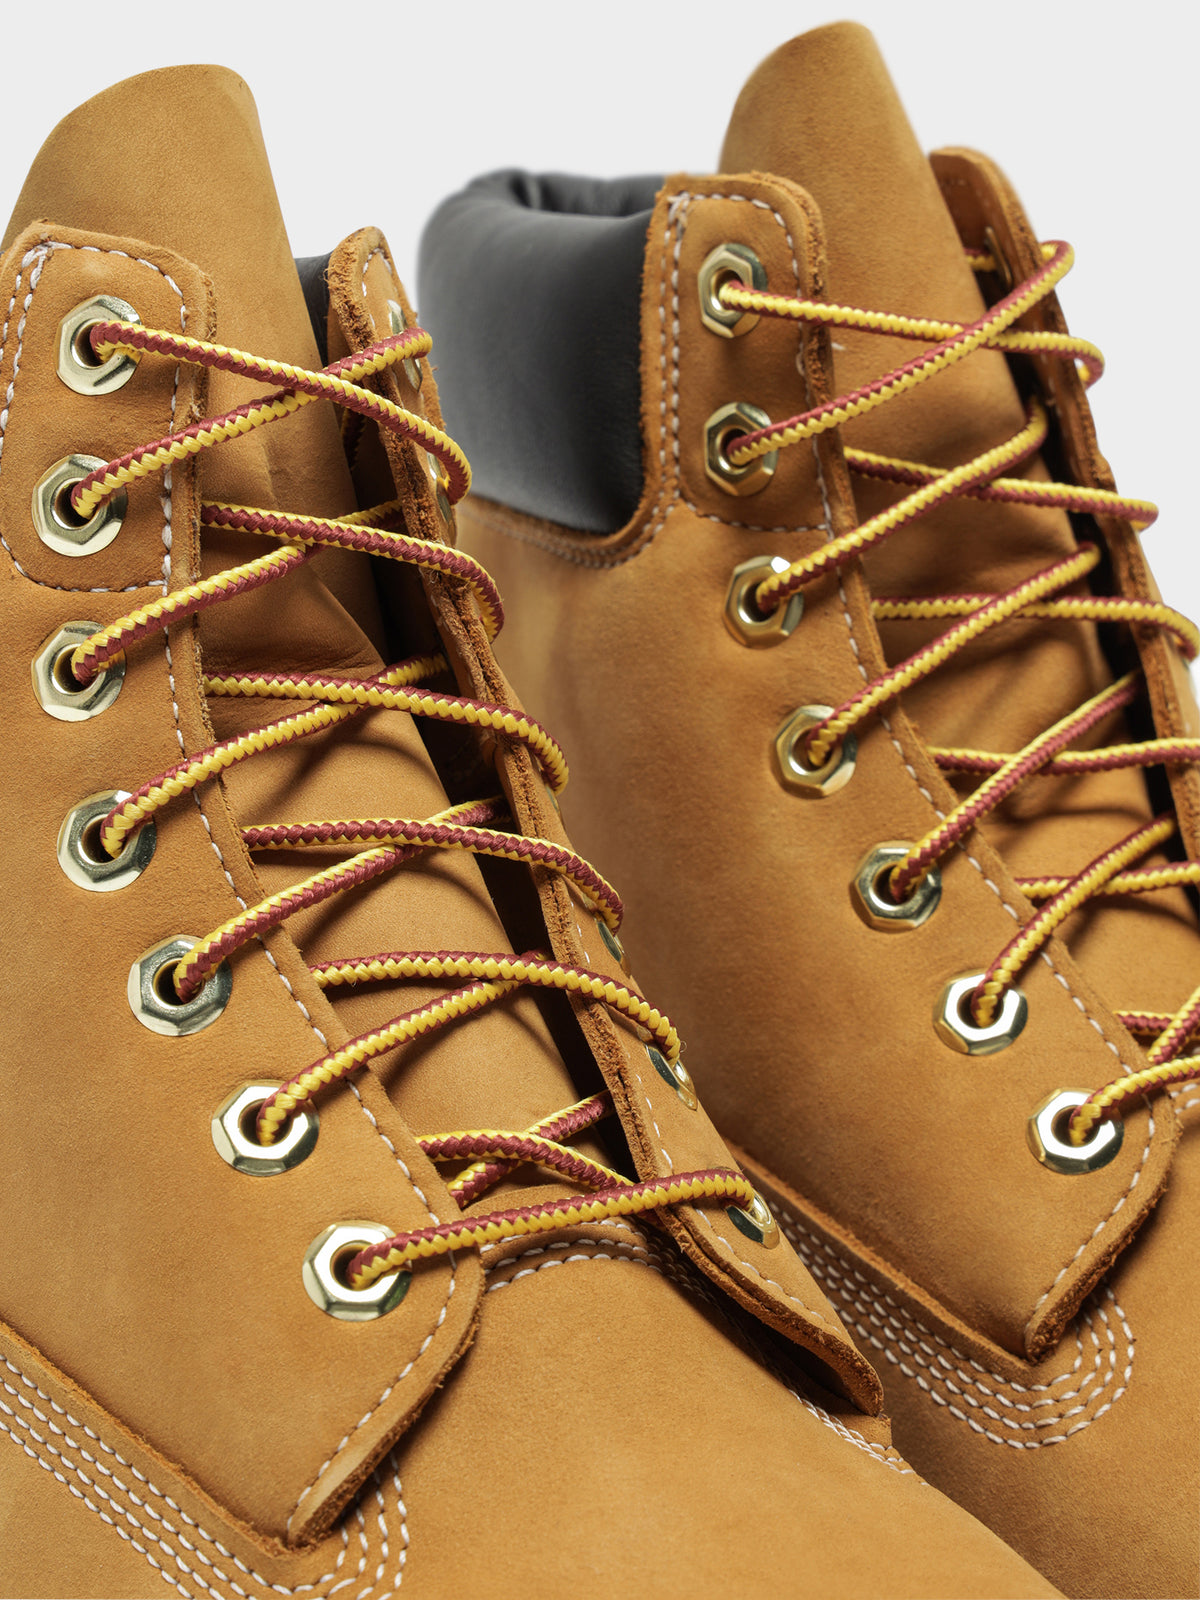 Mens Icon Boot in Wheat Waterbuck